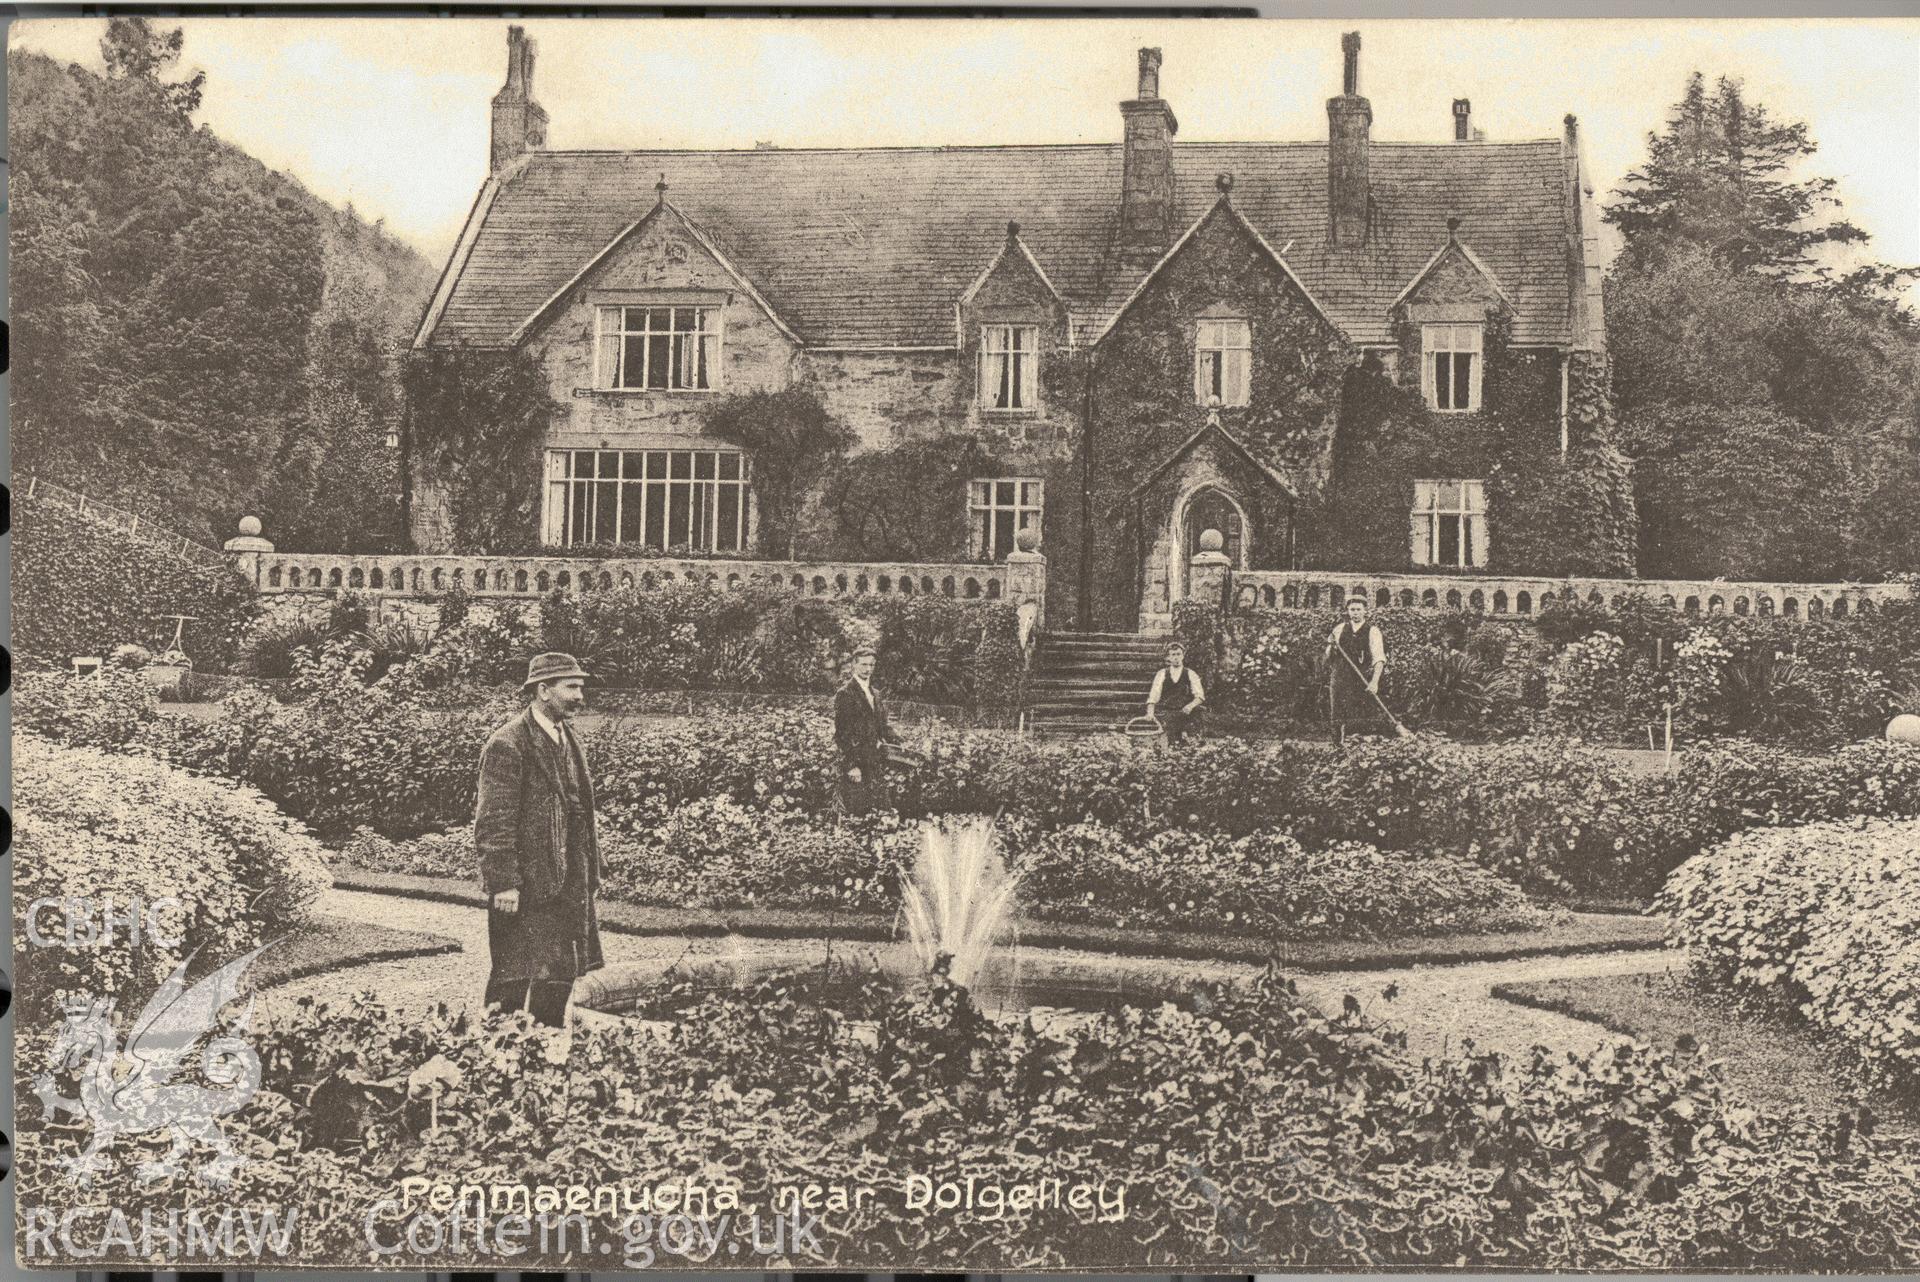 Digitised postcard image of Penmaenucha, Dolgellau, including garden and 4 gardeners, F Arnfield Stationer &c., Dolgelley. Produced by Parks and Gardens Data Services, from an original item in the Peter Davis Collection at Parks and Gardens UK. We hold only web-resolution images of this collection, suitable for viewing on screen and for research purposes only. We do not hold the original images, or publication quality scans.